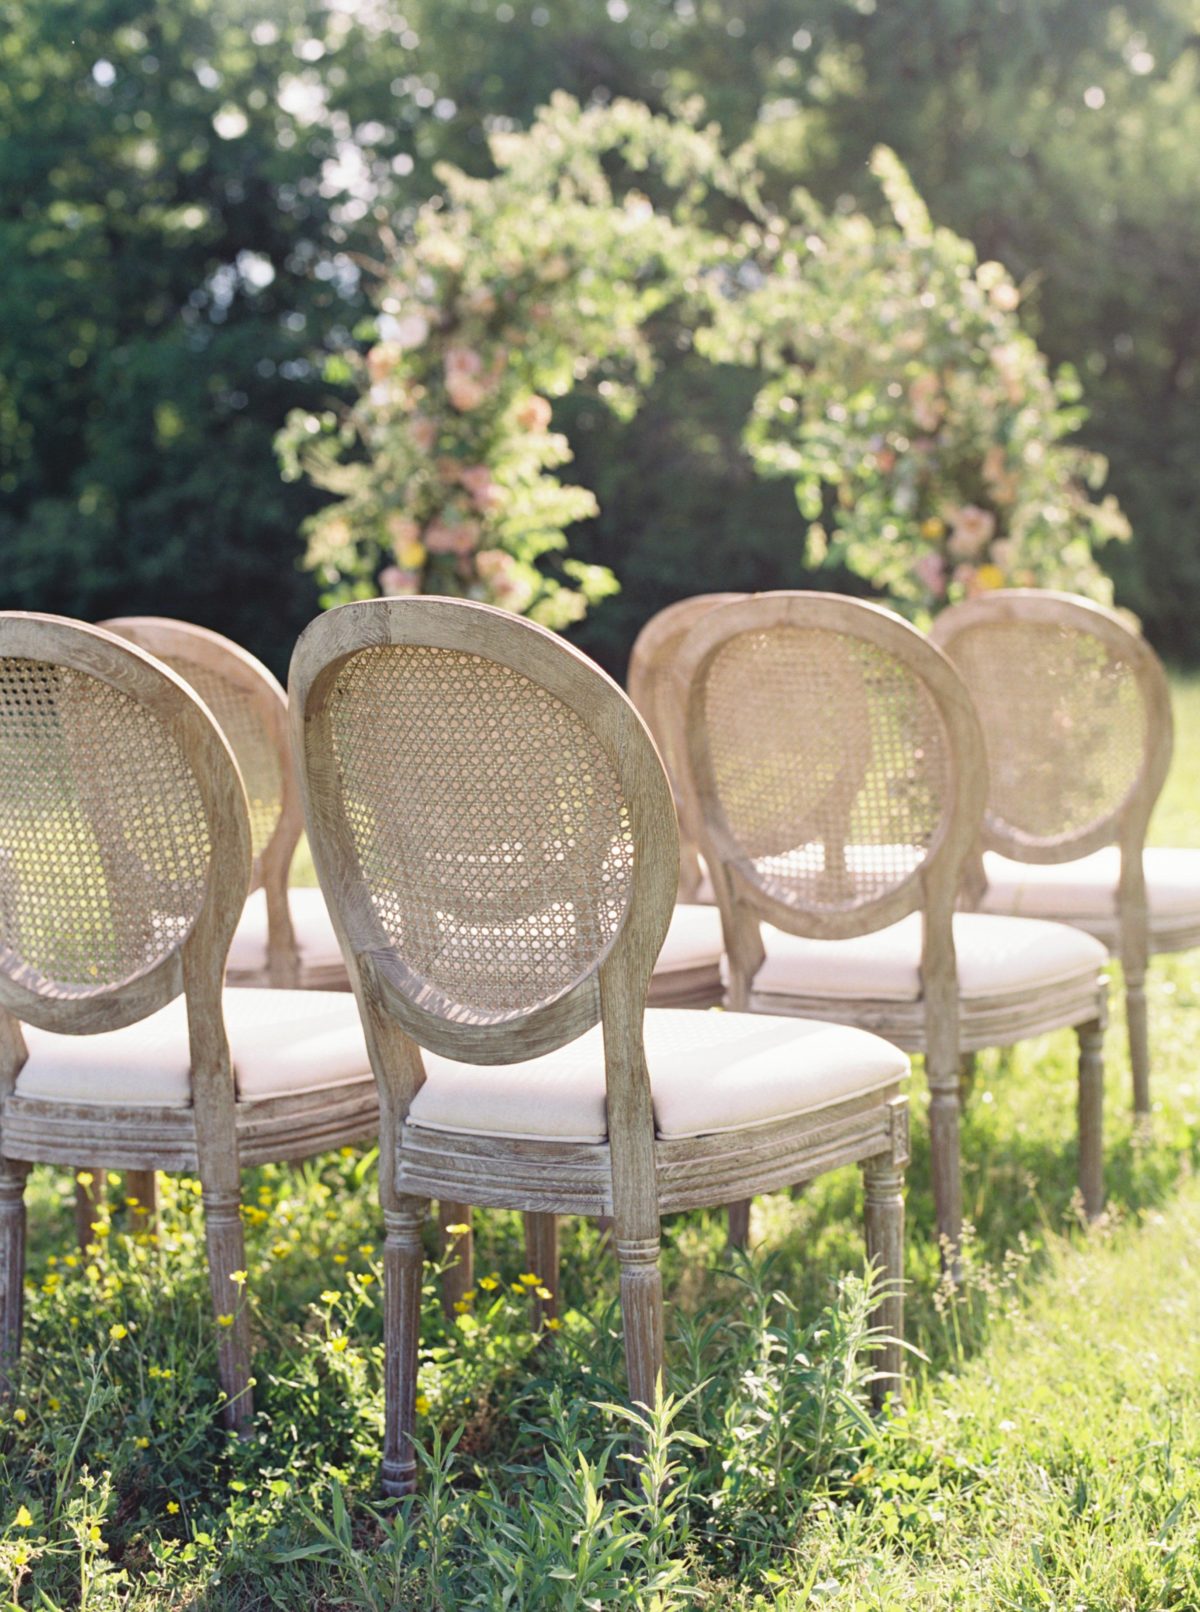 French country dining chair rentals by Please Be Seated in Nashville.